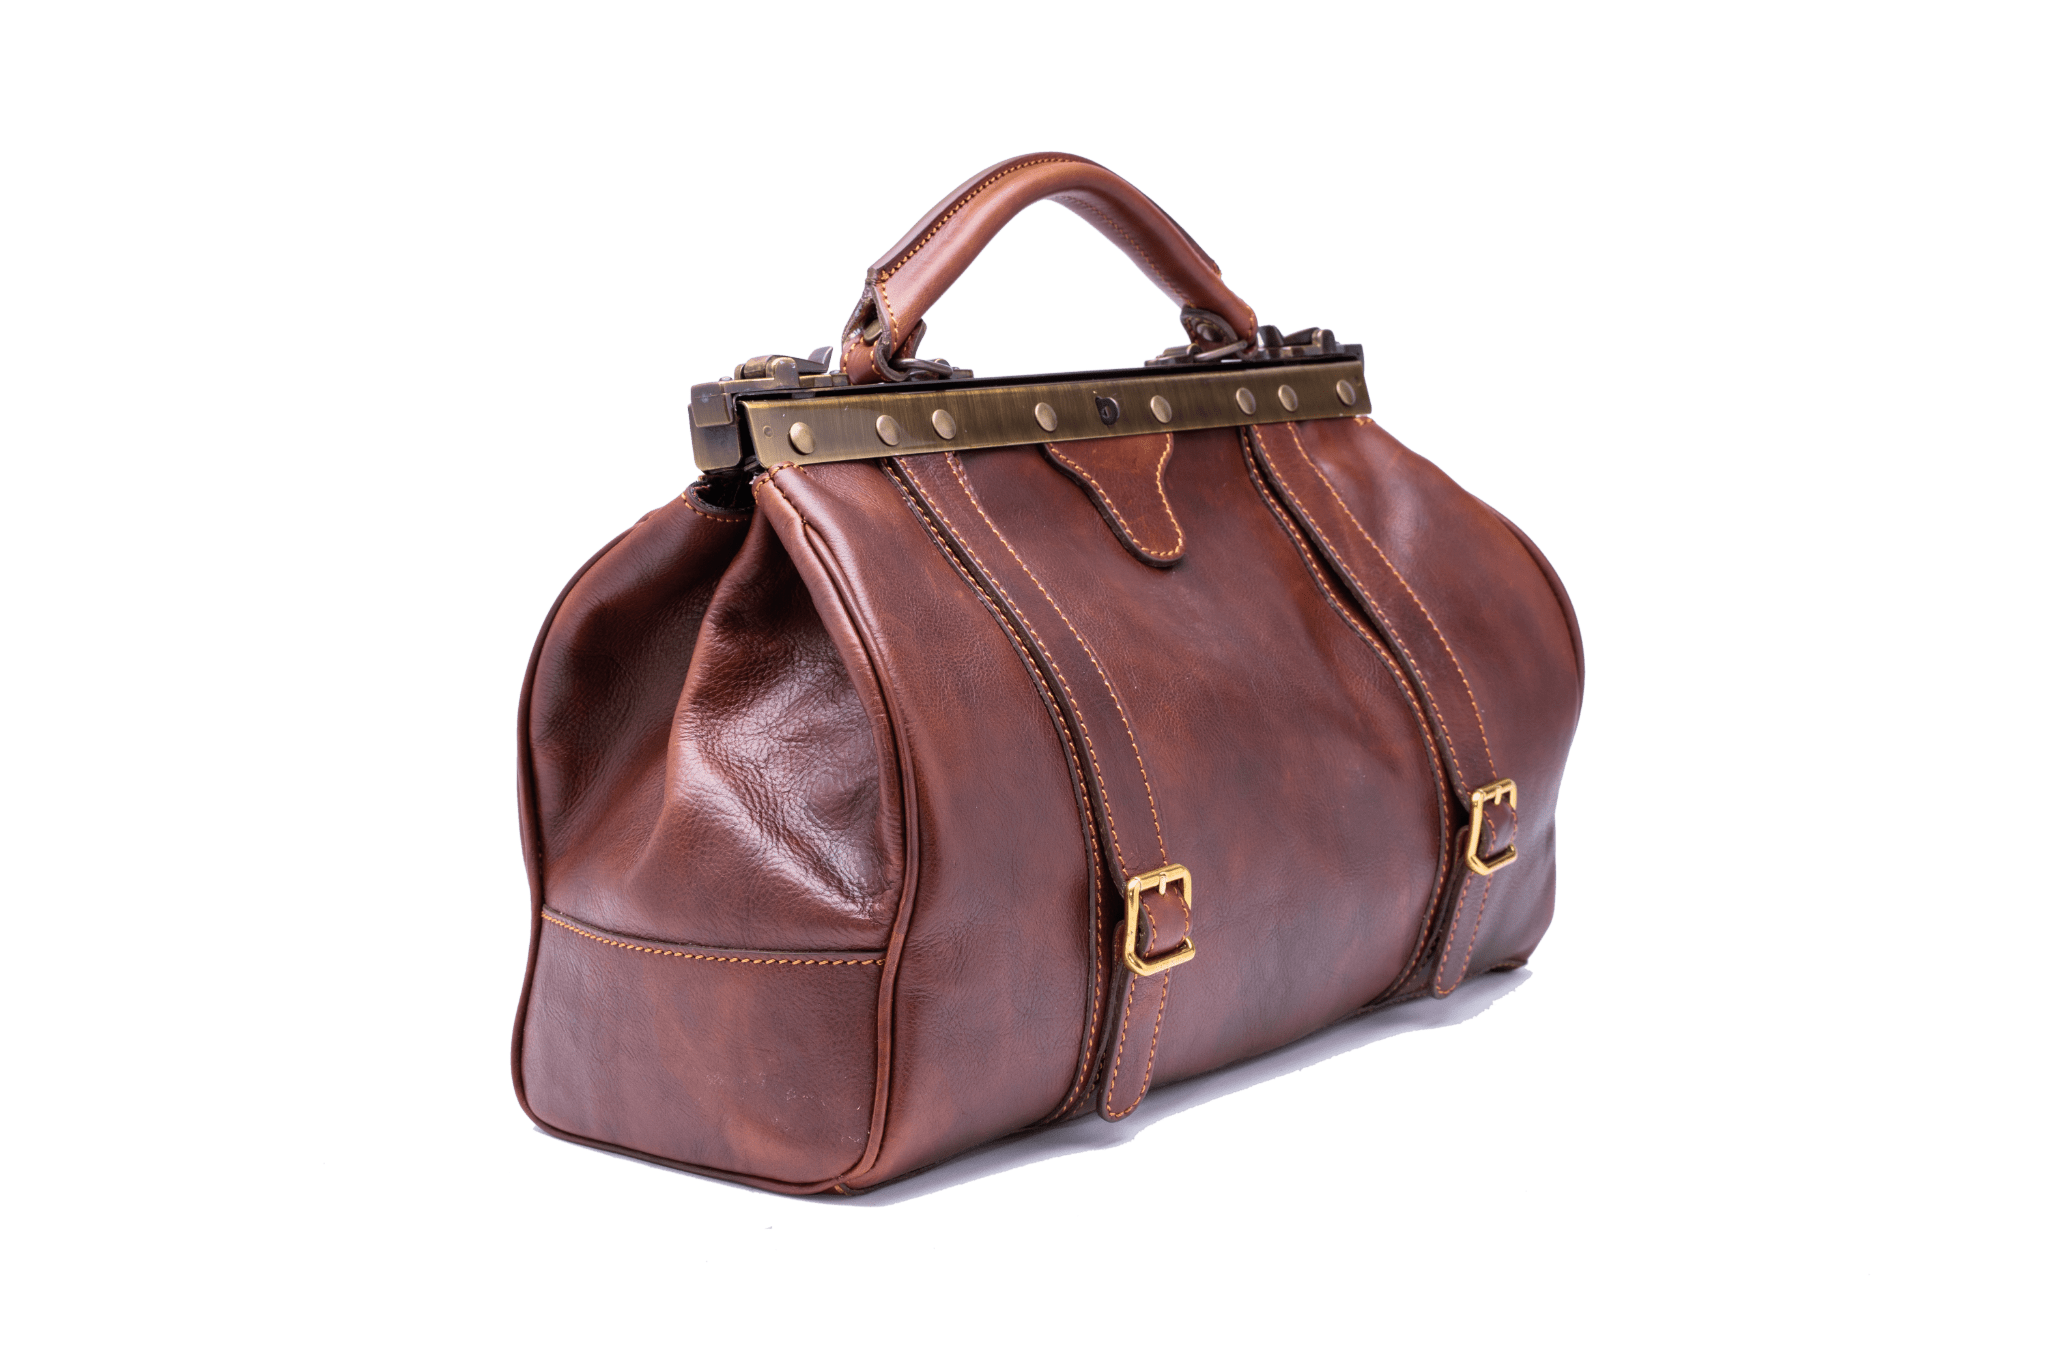 The Old America leather doctor's bag fascinates with its timeless style and elegance.